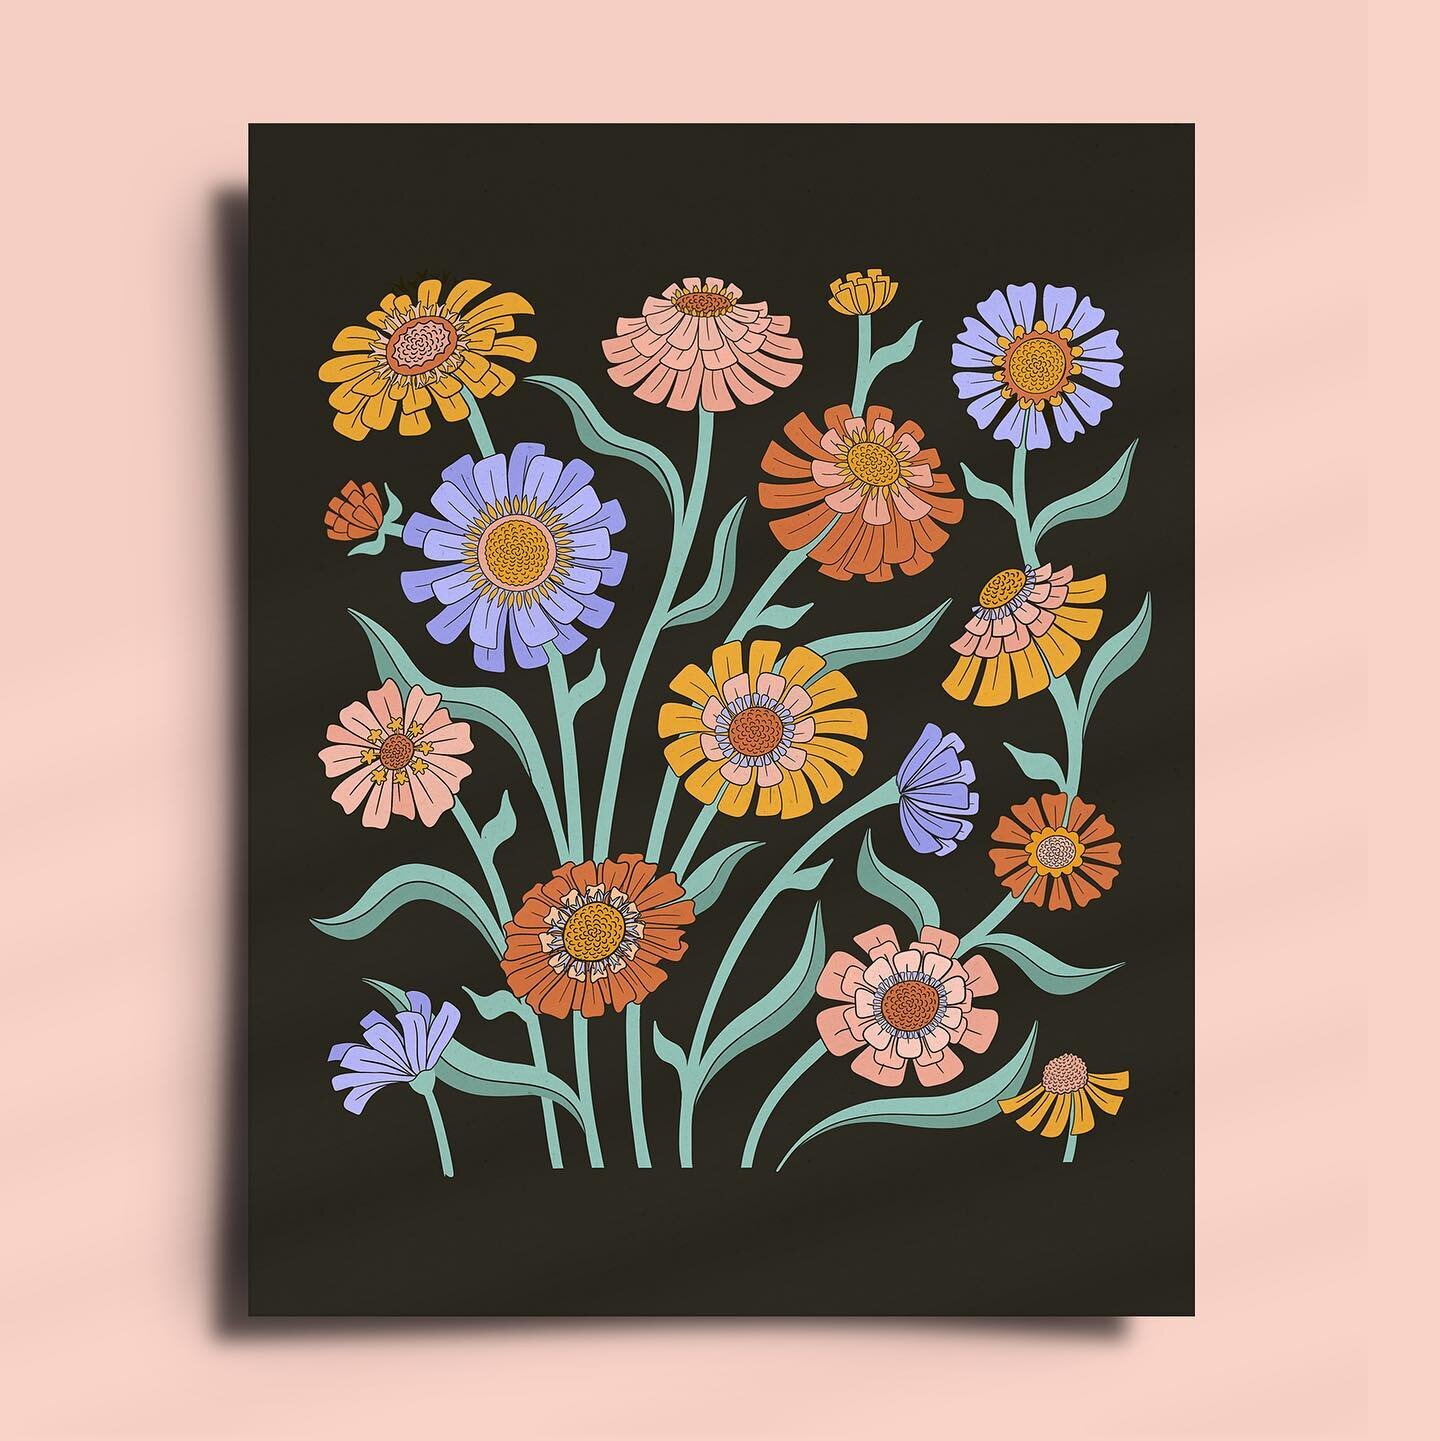 Just a little weekend floral play. After drawing daisies last week, I felt inspired to pick another flower type to experiment with. So I decided I should start with one of my favorite flower types - zinnias! There&rsquo;s a ton of variety among zinni